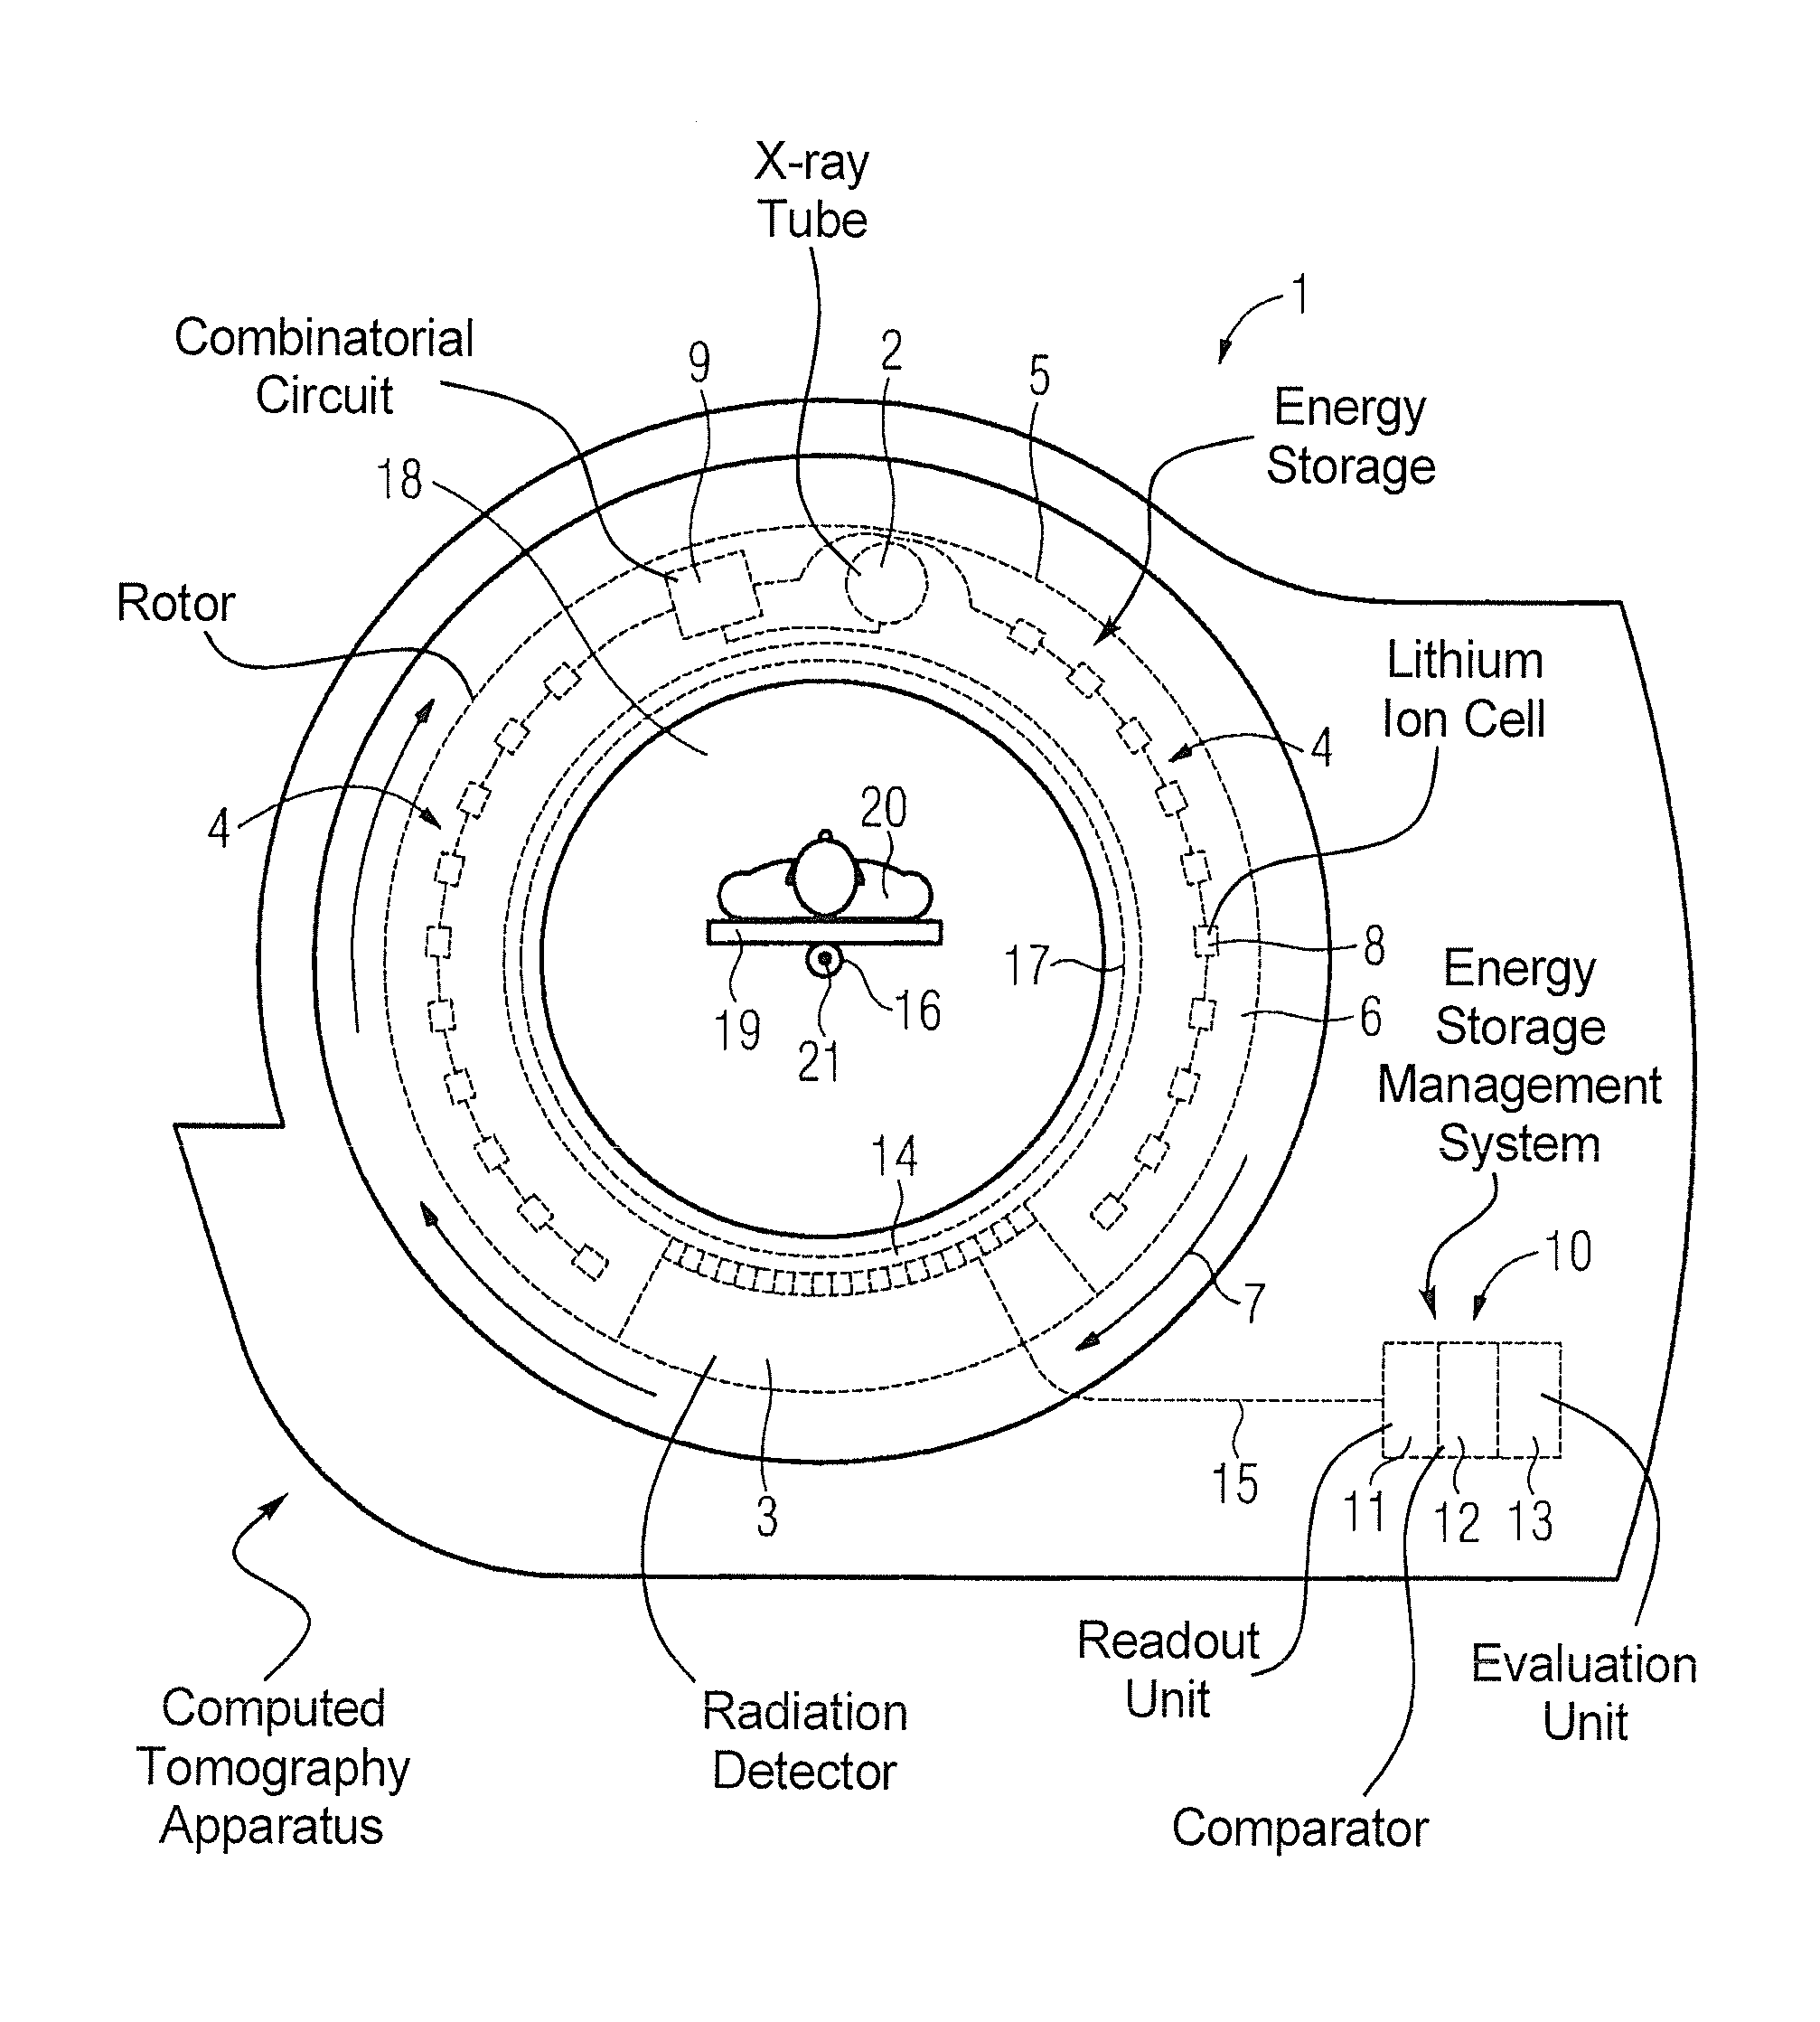 Imaging tomography apparatus with built-in energy storage to cover high power operation